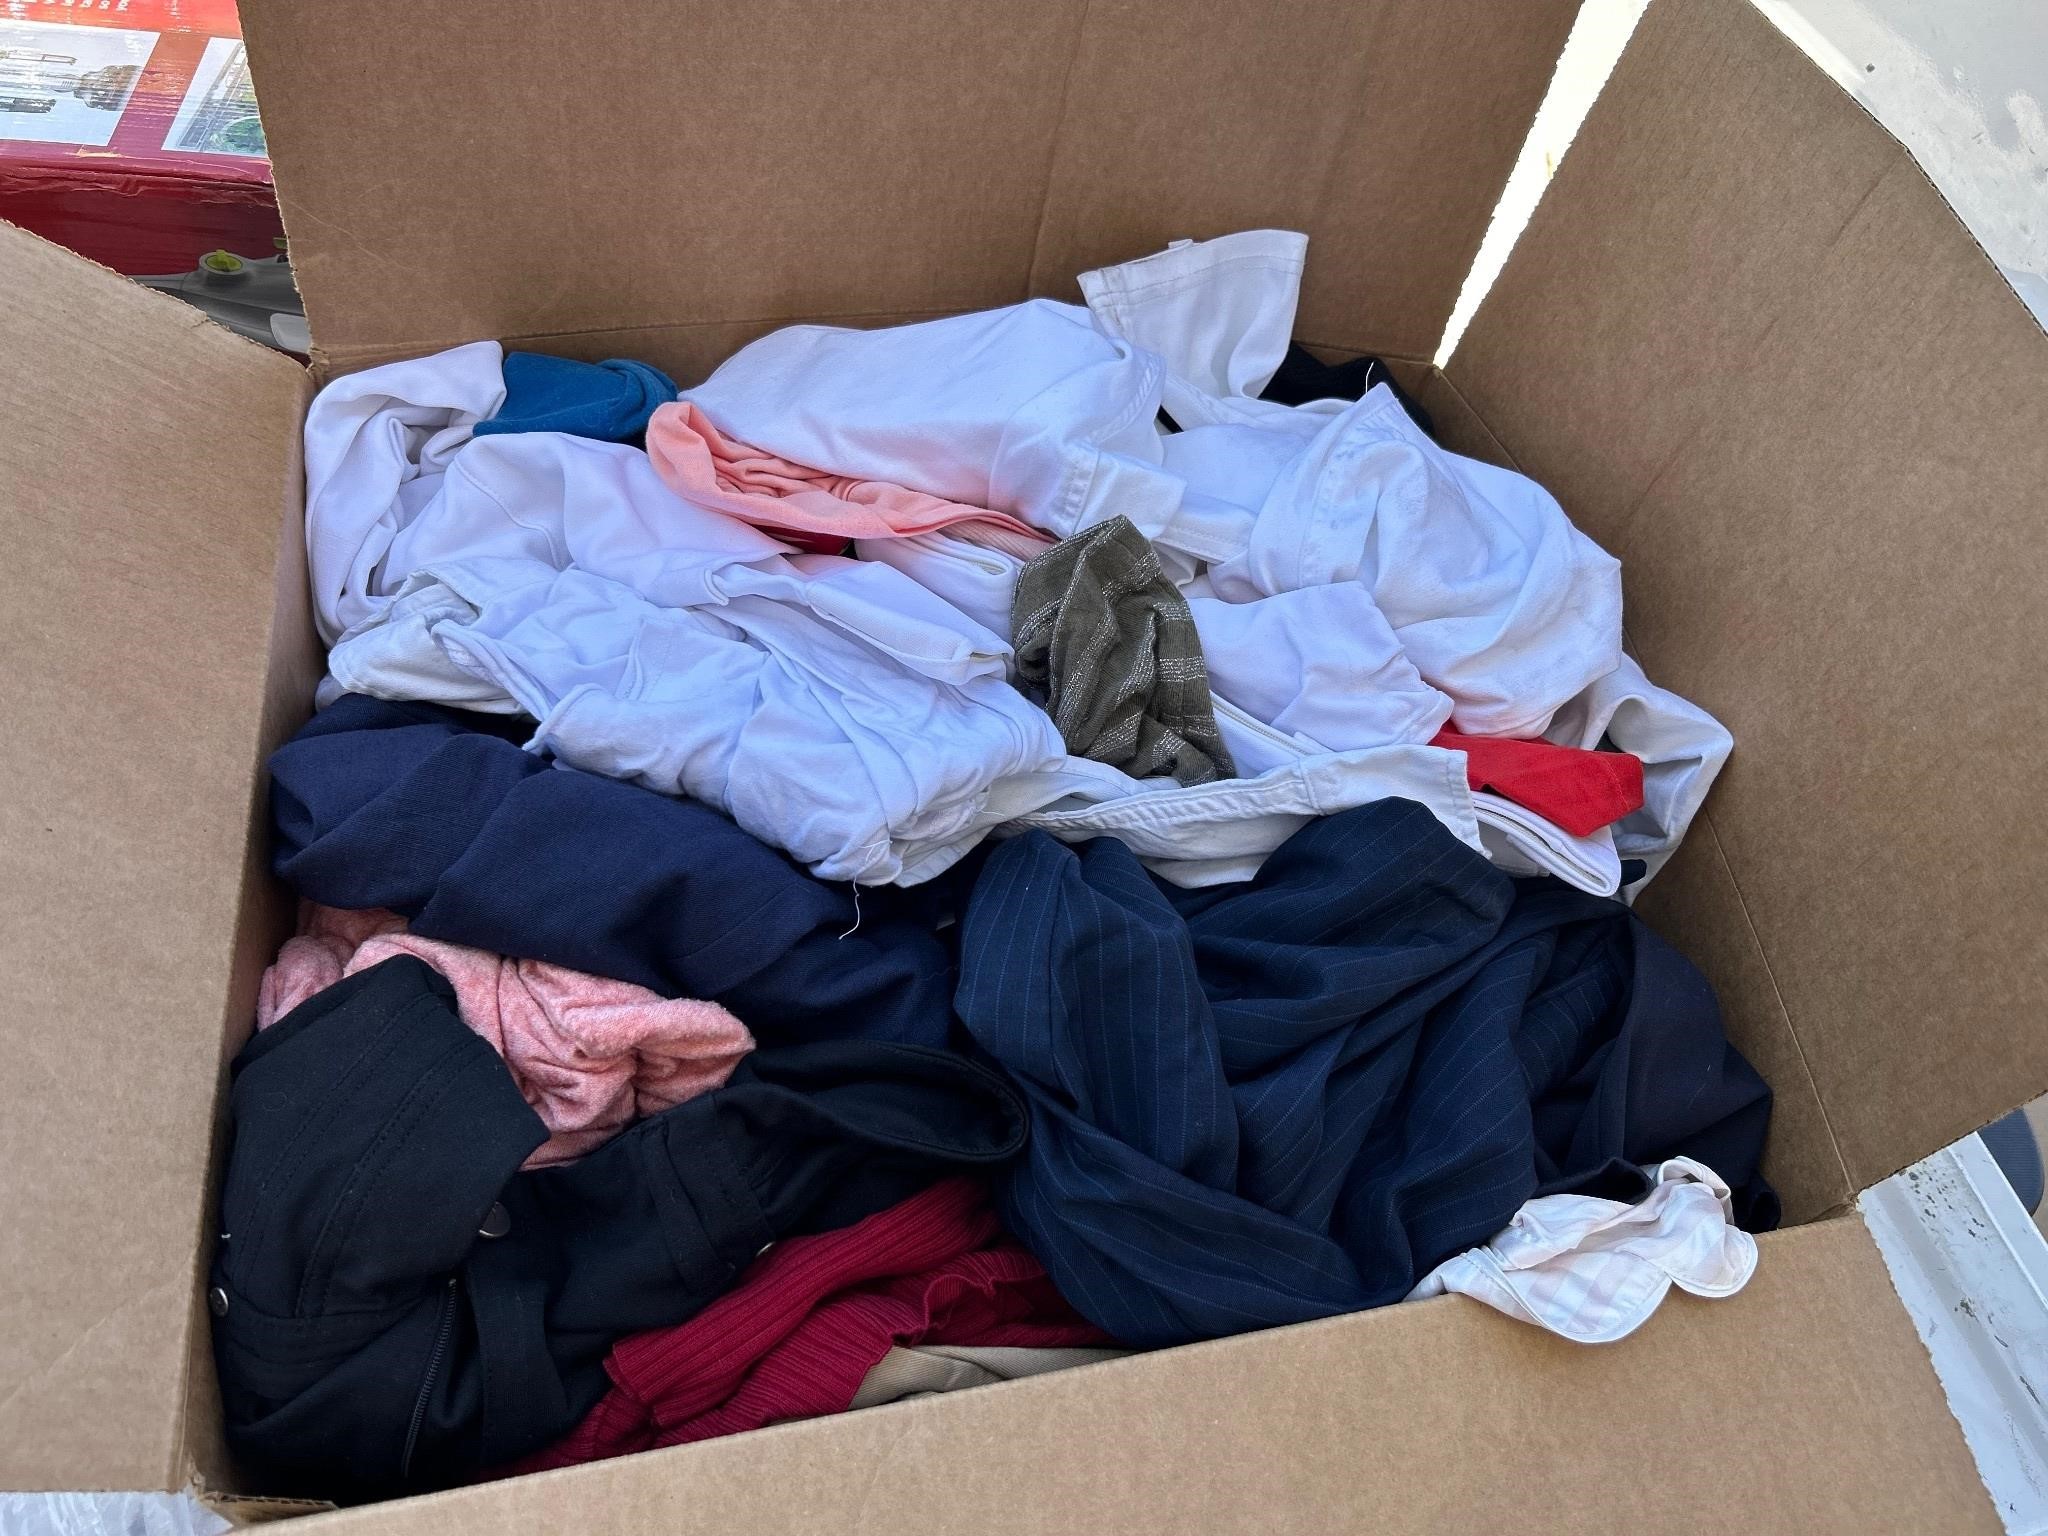 Miscellaneous box of new and used clothes